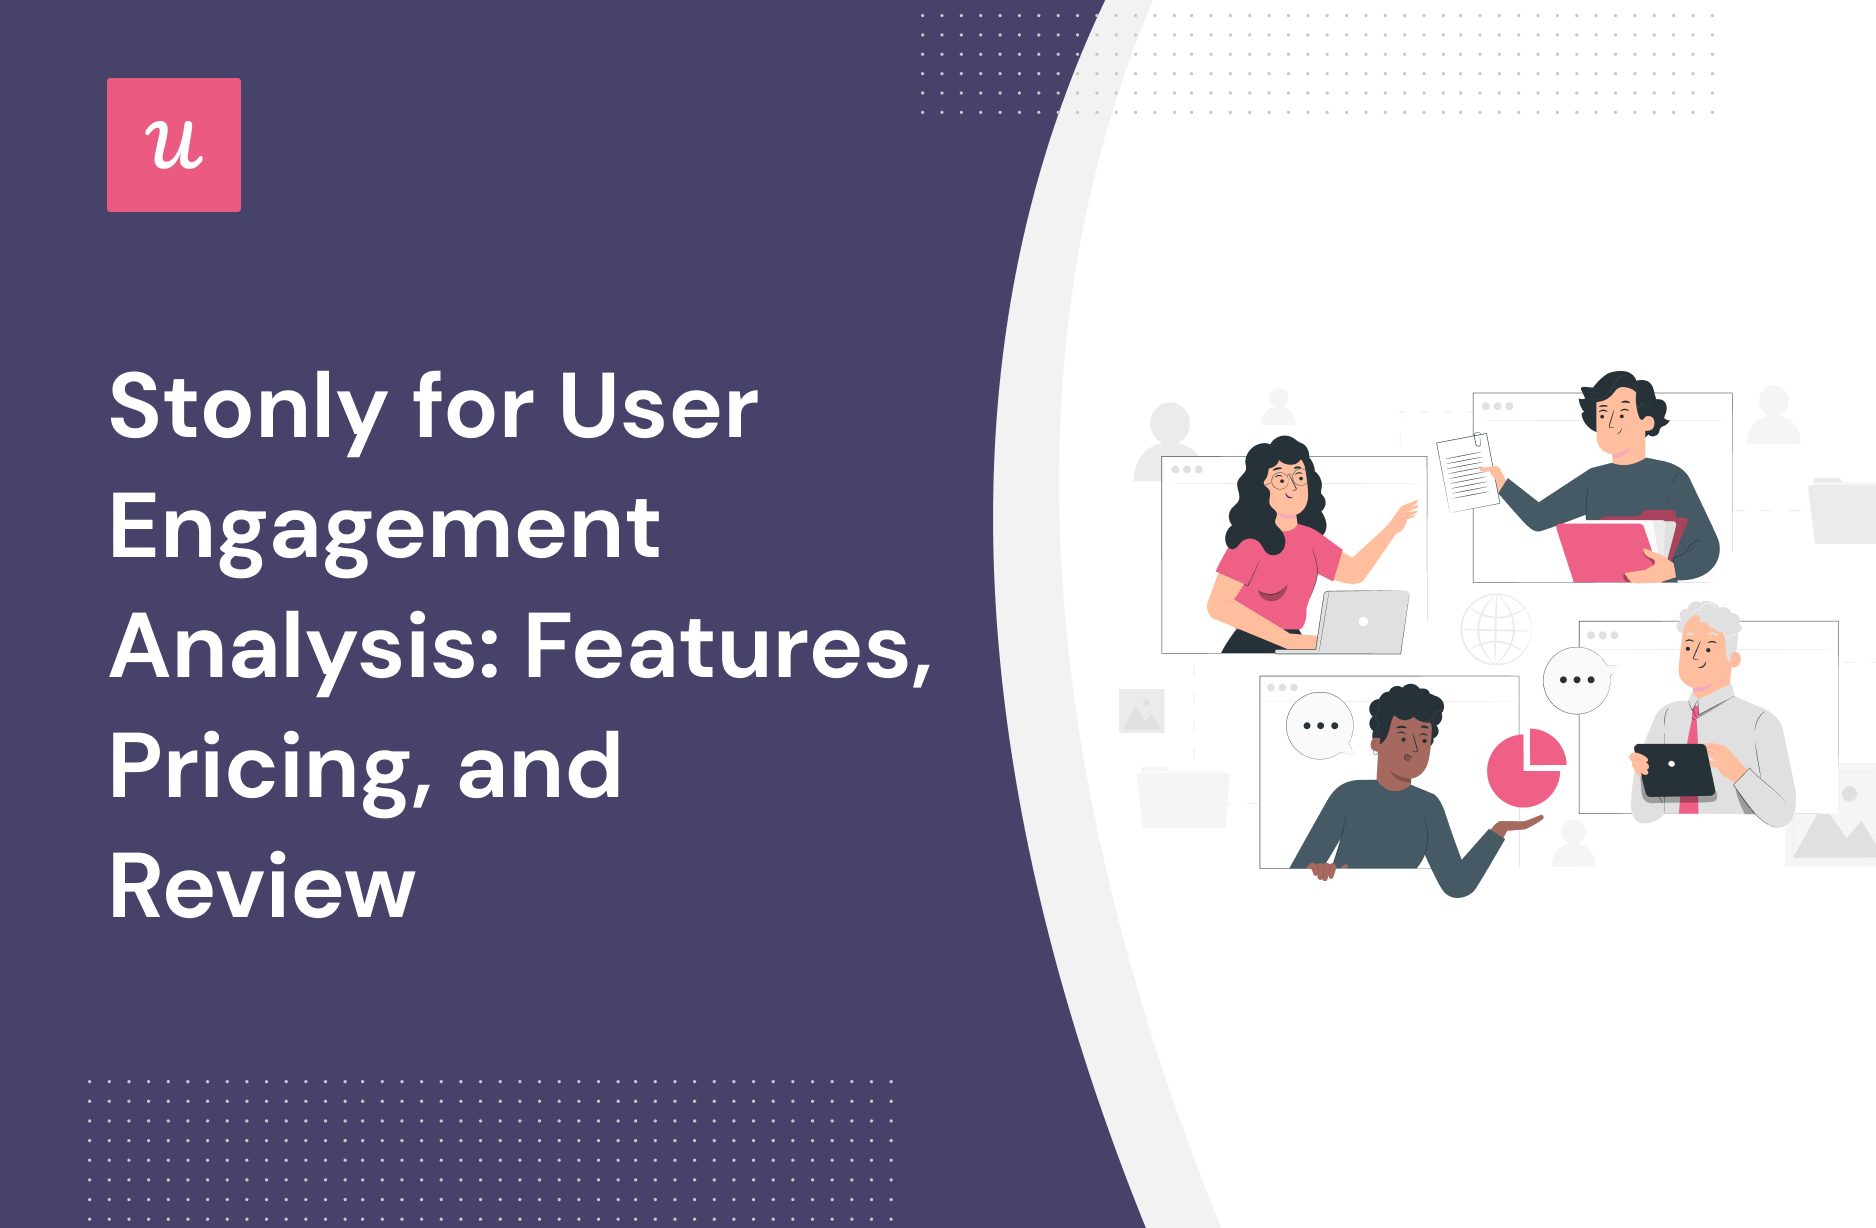 Stonly for User Engagement Analysis: Features, Pricing, and Review